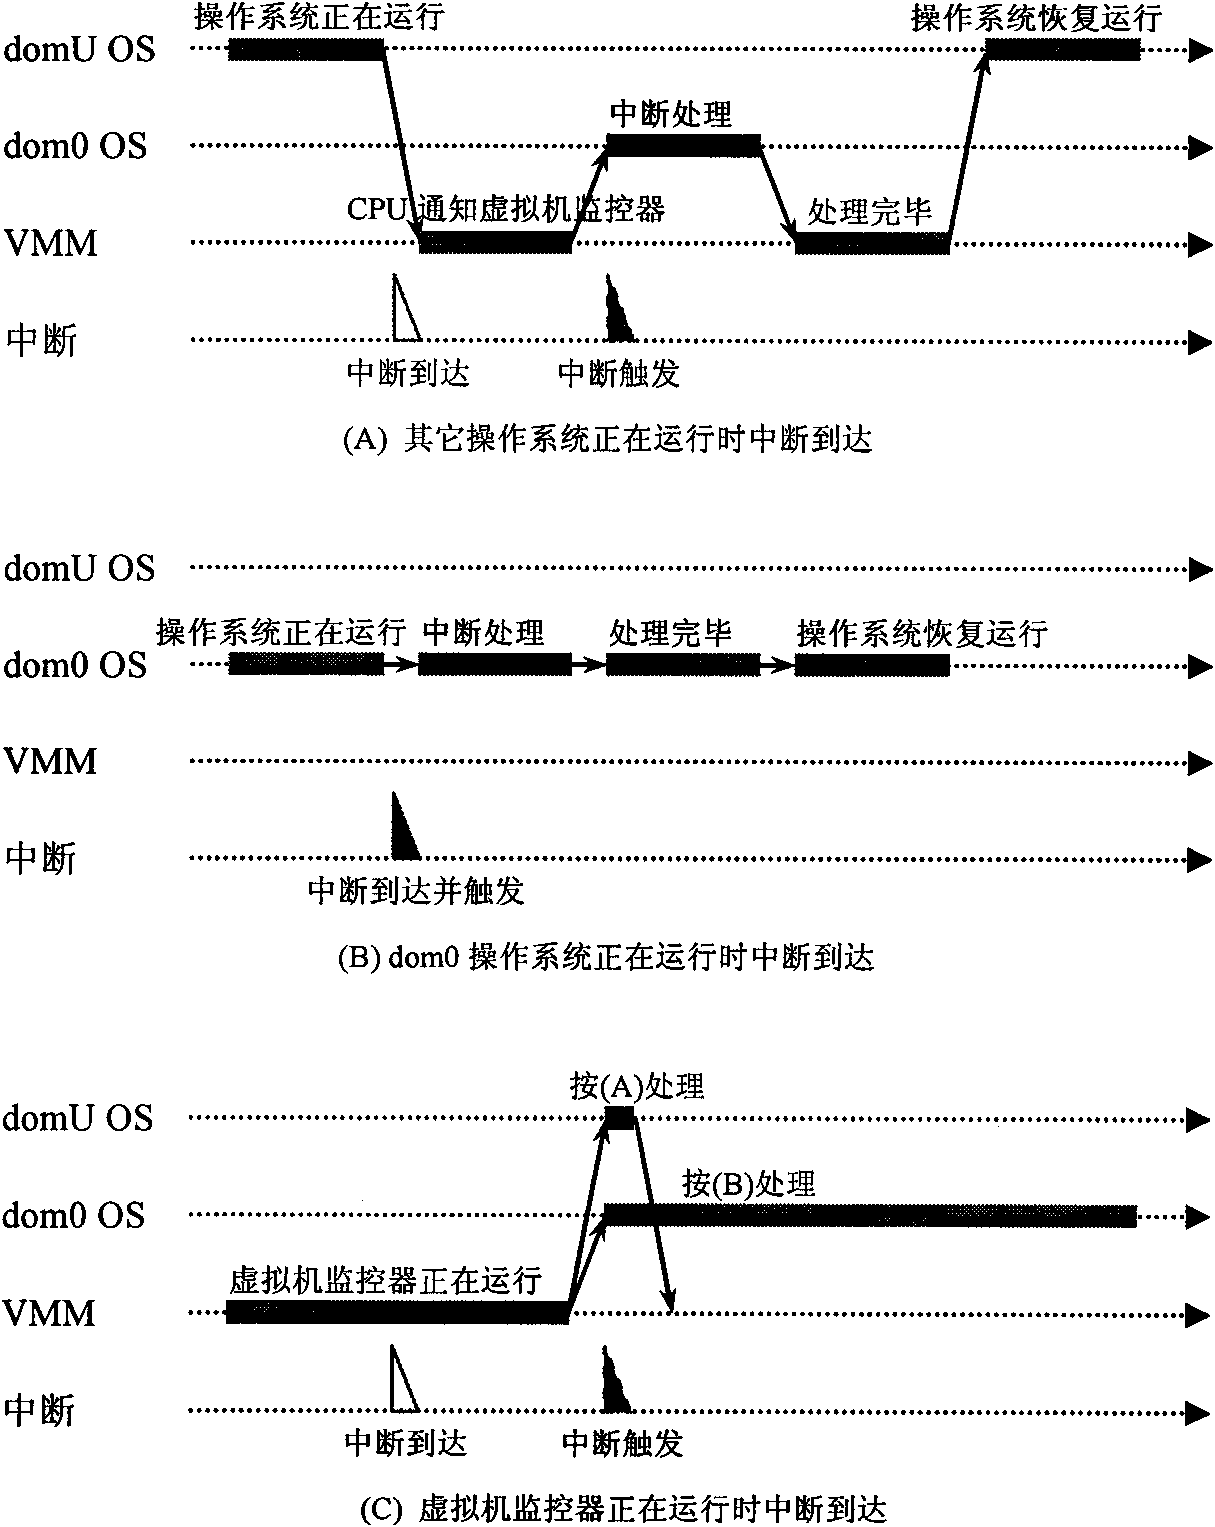 Virtual physical interrupt processing method of X86 computer